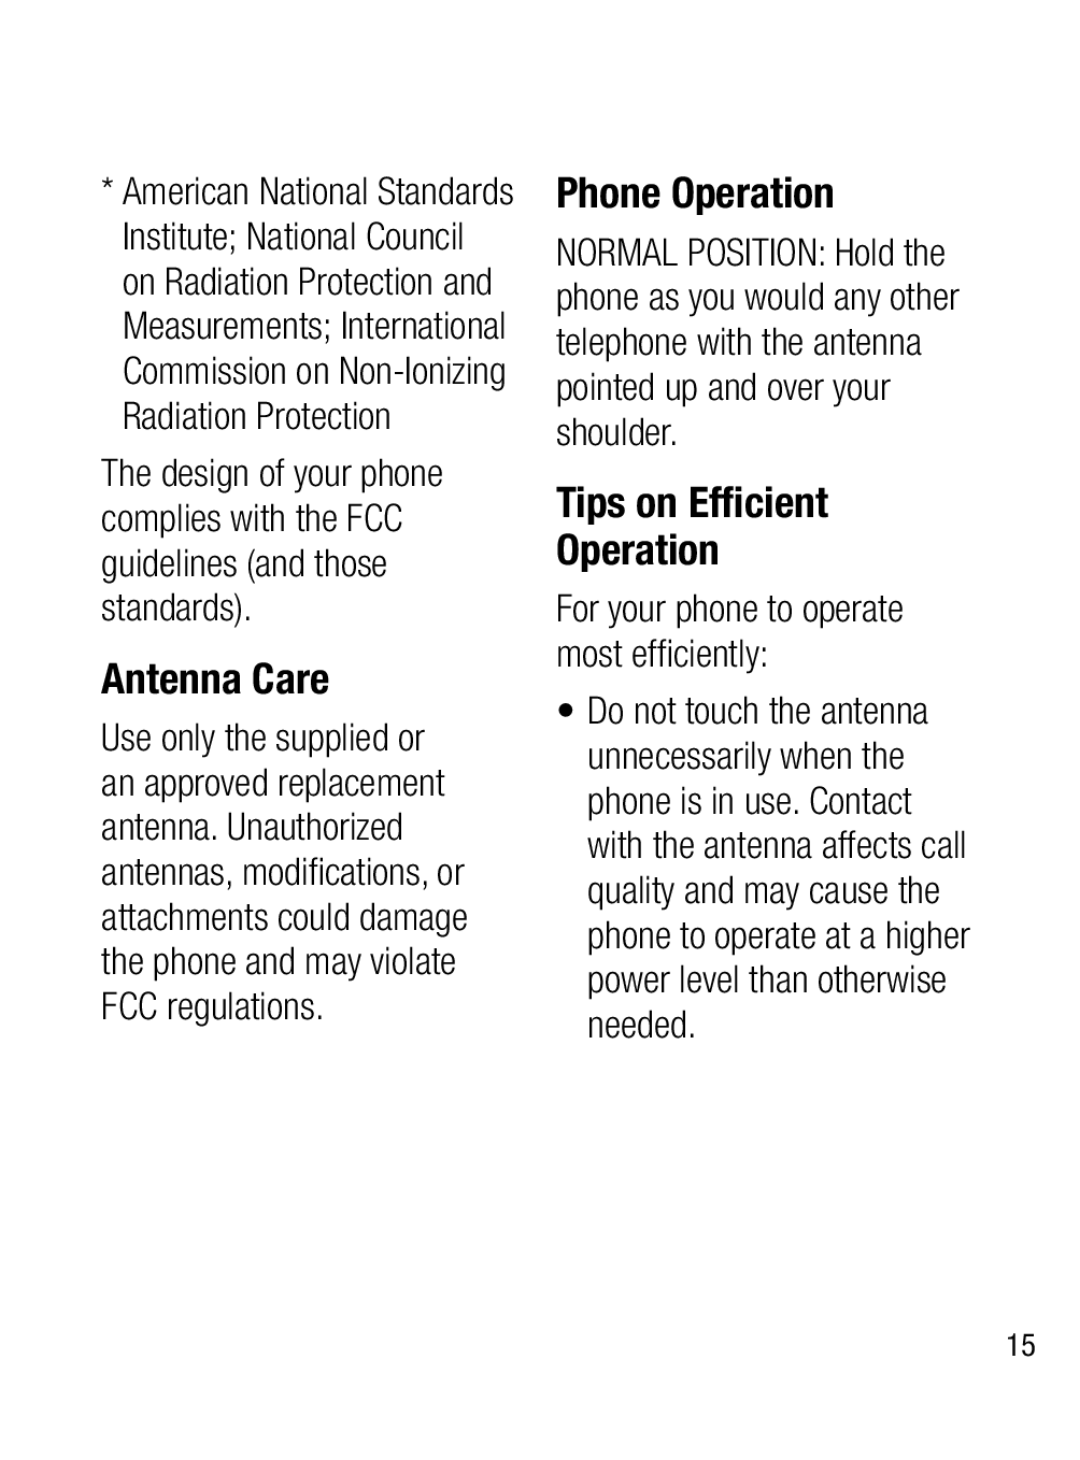 LG Electronics A133CH manual Antenna Care, Phone Operation, Tips on Efﬁcient Operation 